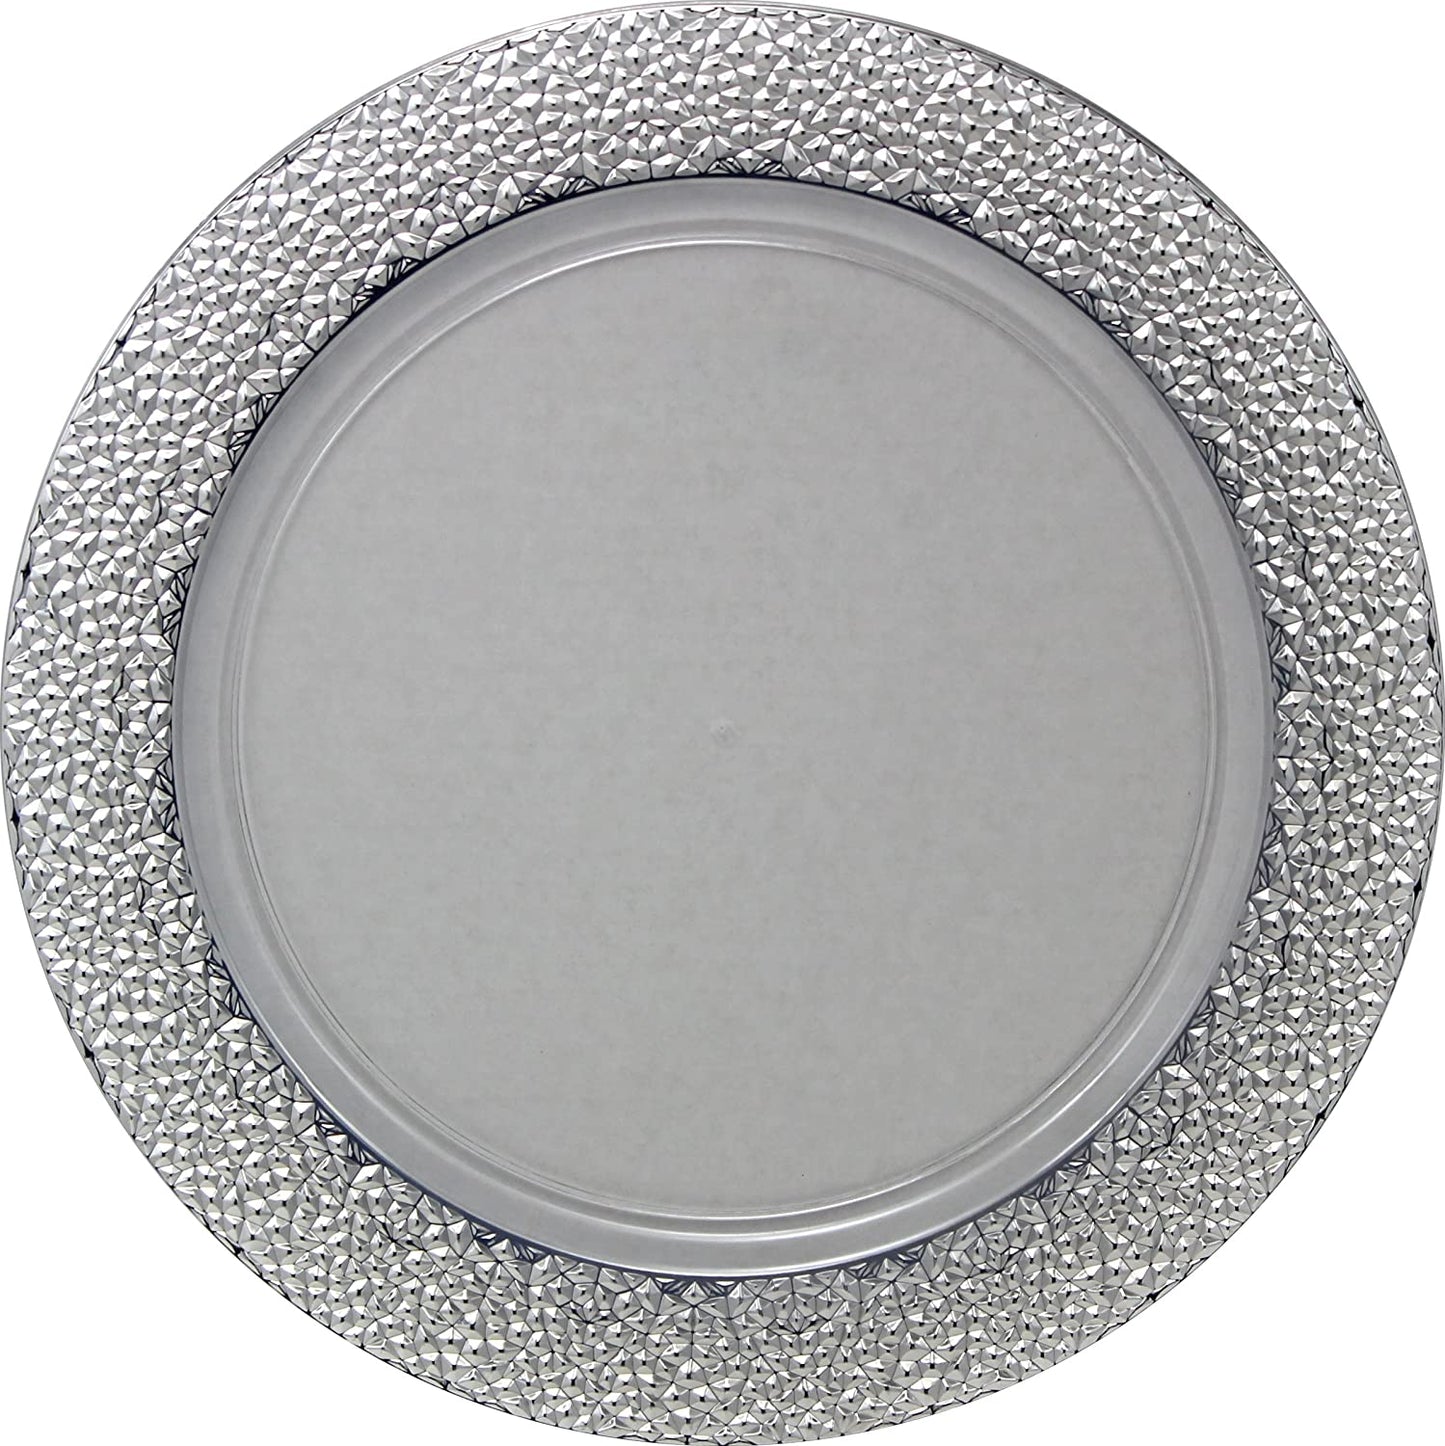 Charger Hammered Design Plates Silver 13" 2CT Tablesettings Decorline   